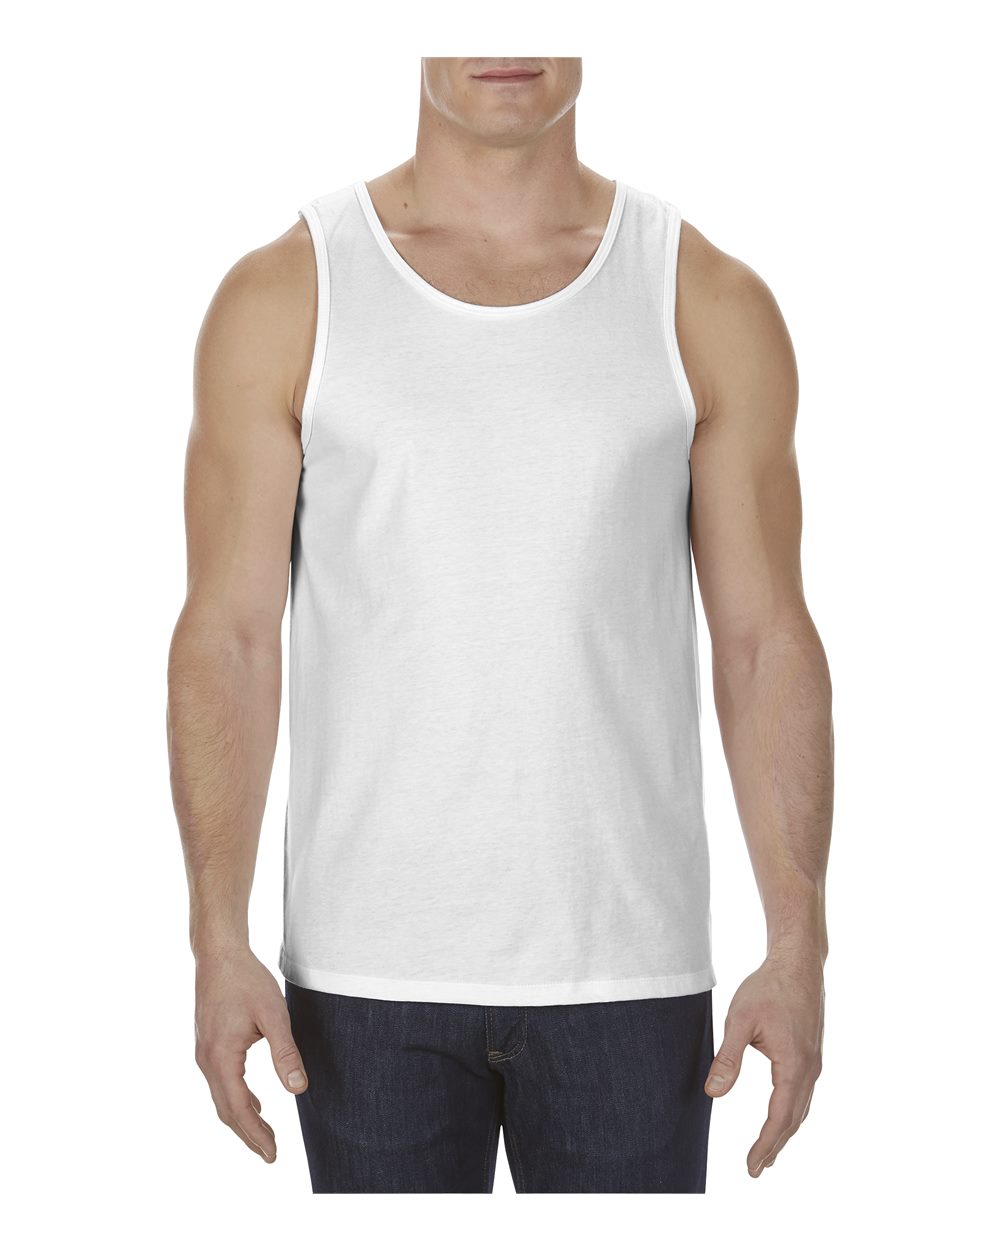 Alstyle 5307 - Ultimate Tank Top